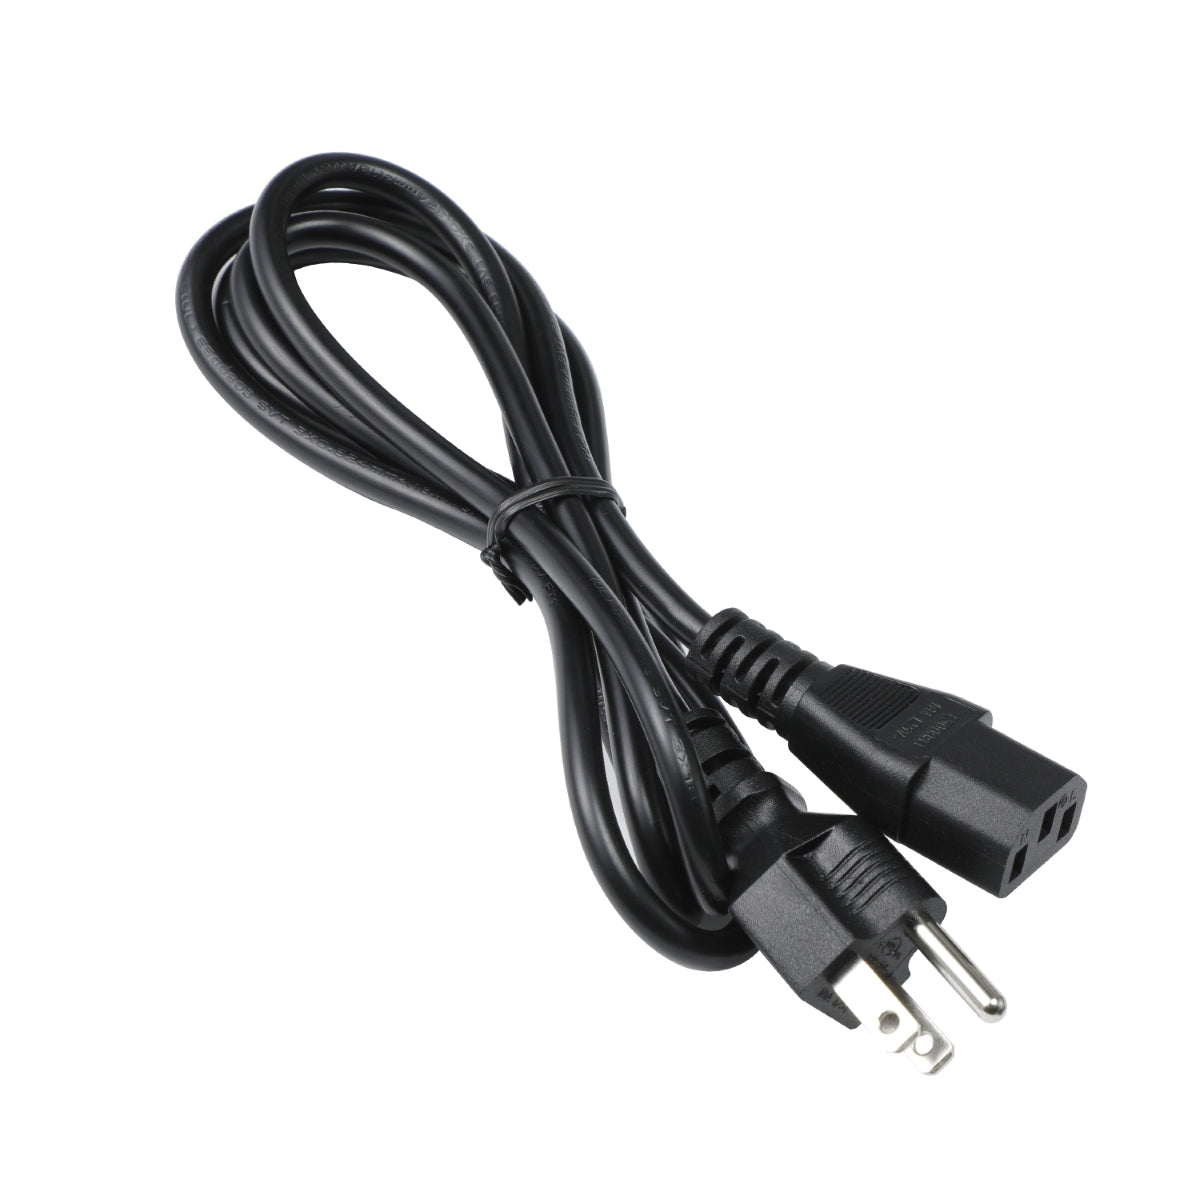 Power Cord for HP Pavilion 550-030 Computer.